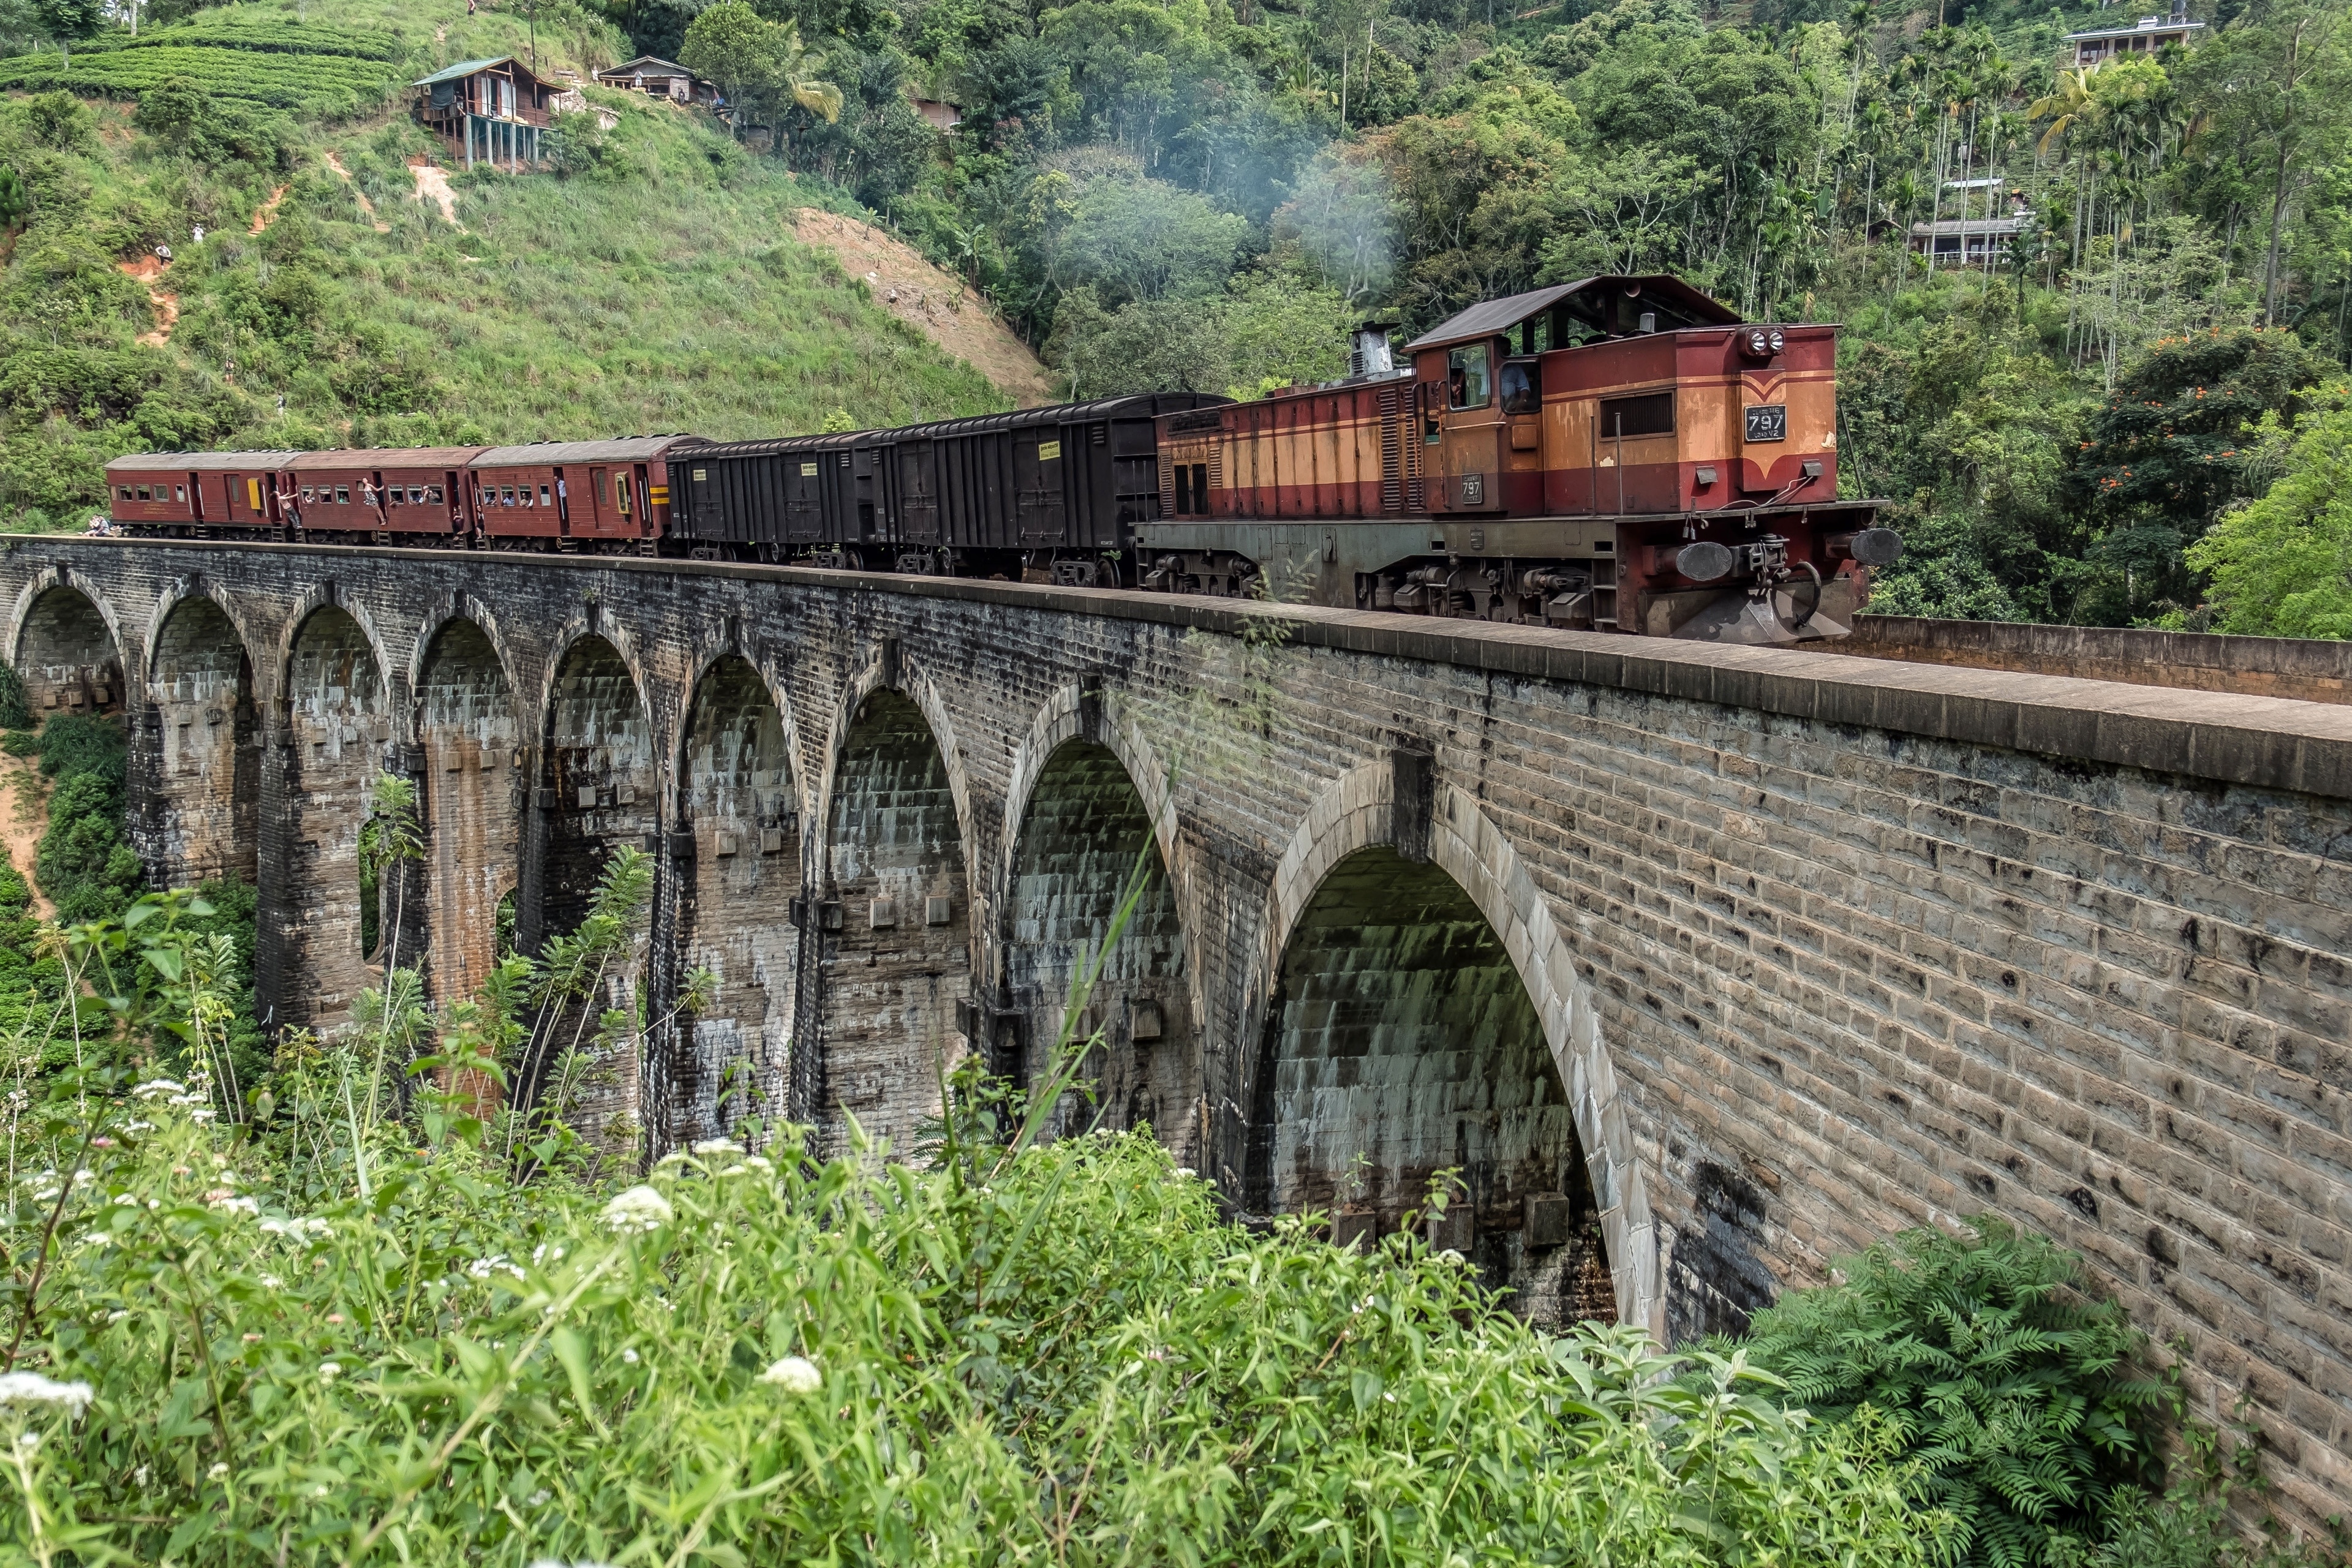 The Demodara nine arch railway bridge is located between Demodara and Ella railway stations. Specialty of this bridge is that, it’s constructed with stones, bricks and cement, but without any steel. 